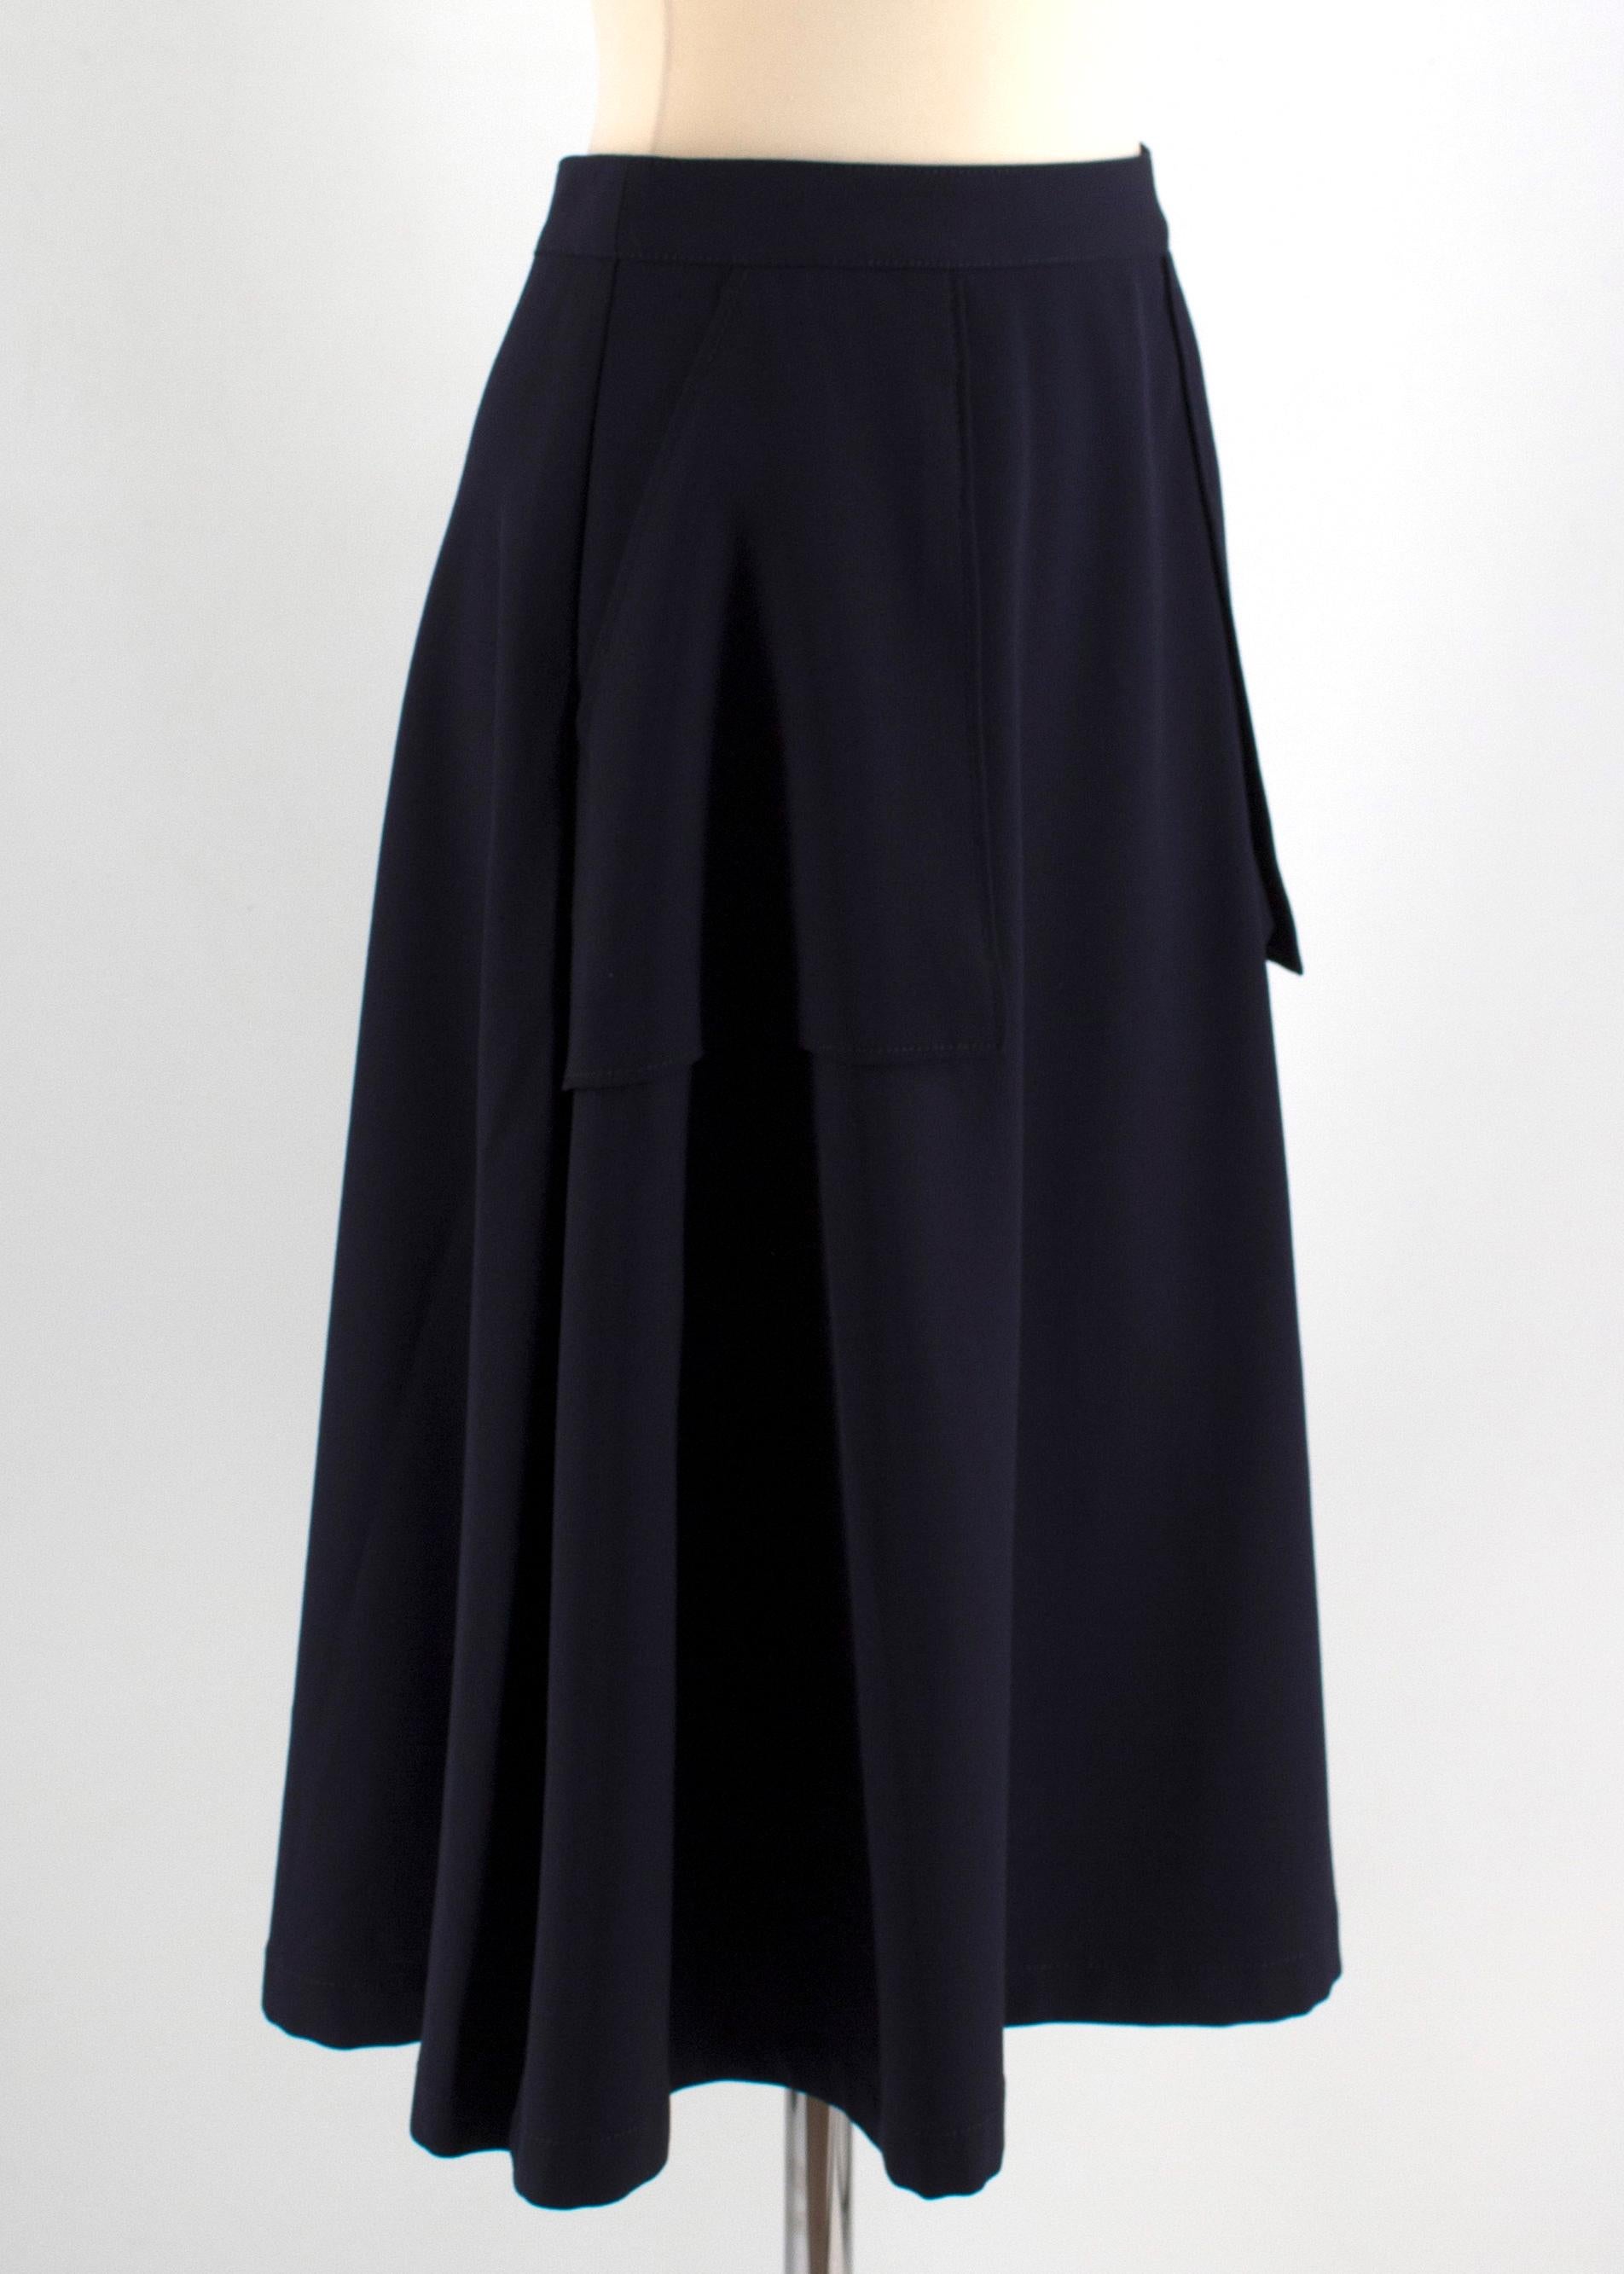 Maison Margiela Navy Blue Pocket Skirt

-Navy, mid-weight woven fabric
-2 exposed pockets 
-One Back pocket
-A-line shape
-Lining:100% viscosa

Please note, these items are pre-owned and may show some signs of storage, even when unworn and unused.